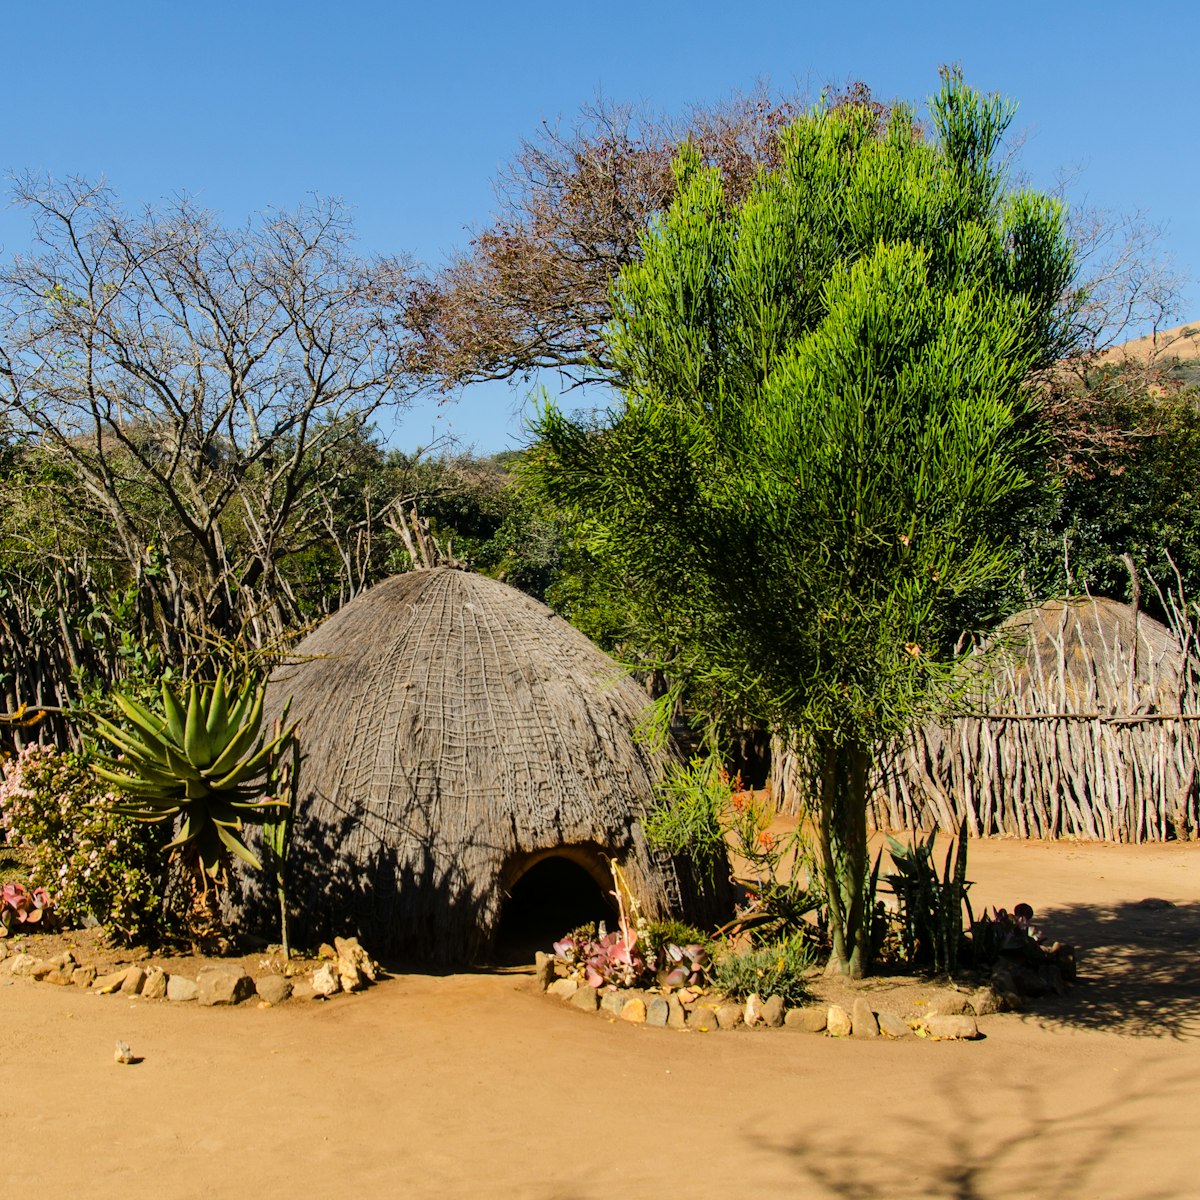 Traditional Swazi Beehive huts and fences in Mantenga Swazi Cultural Village, Swaziland.